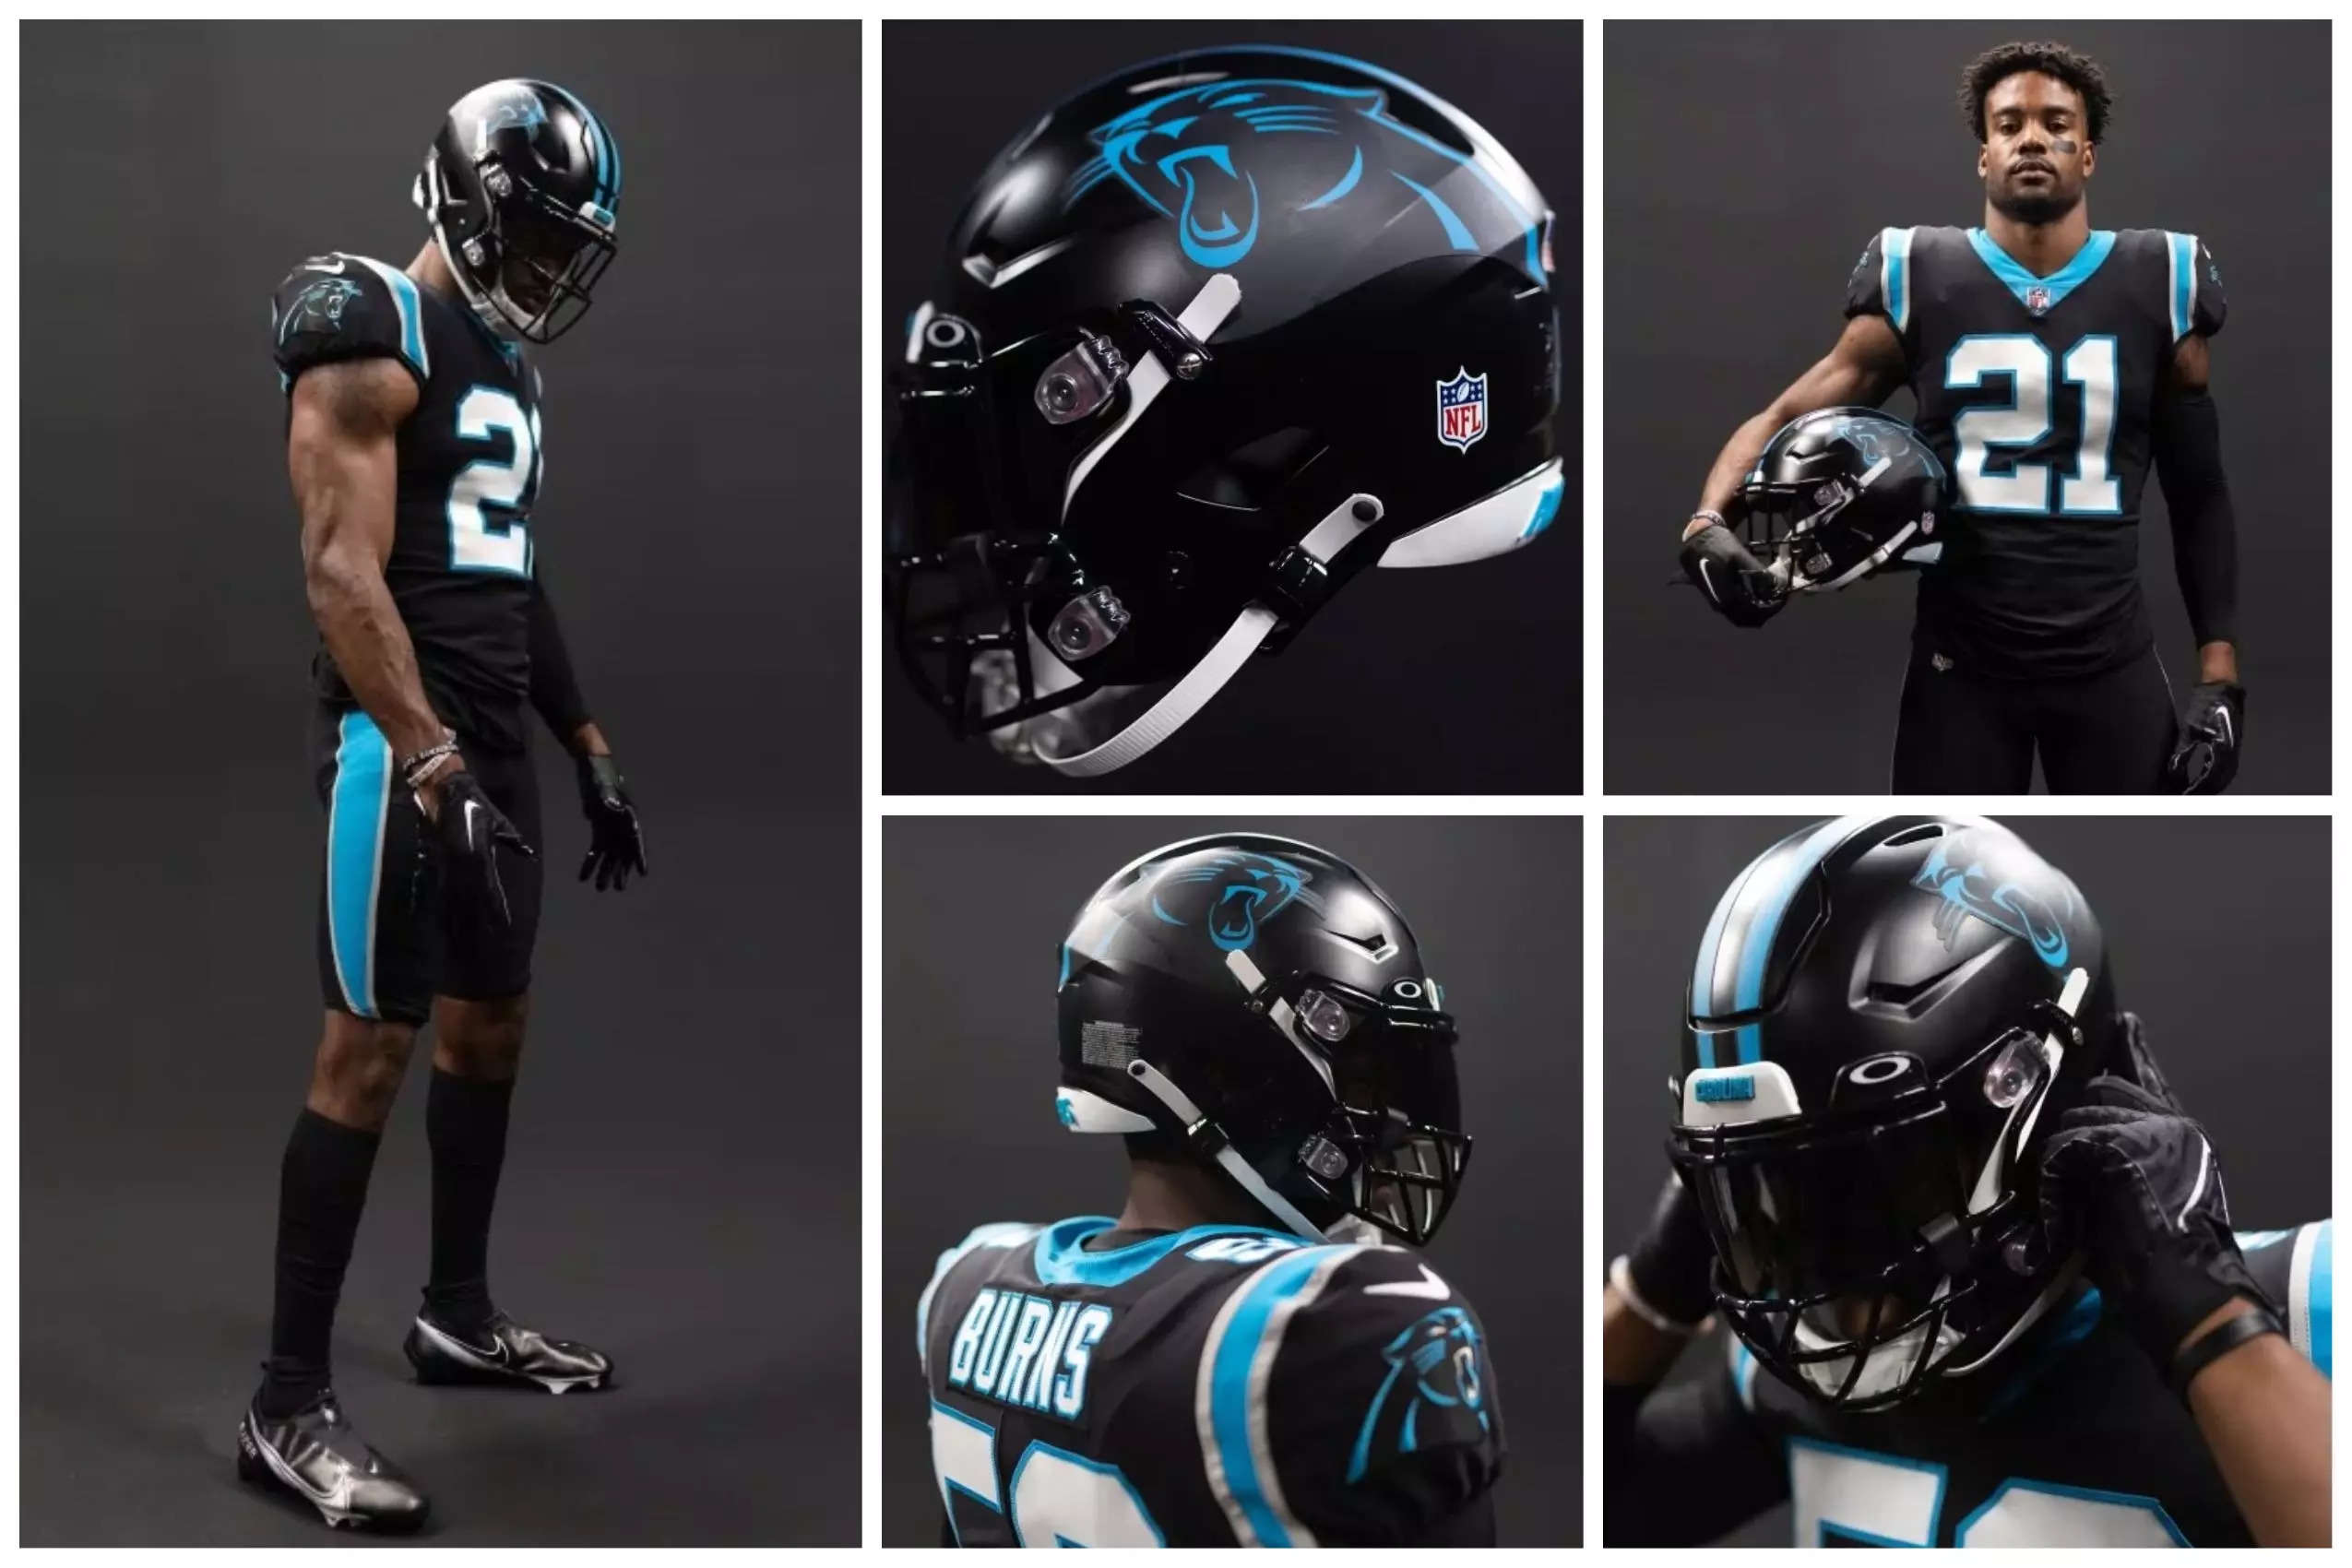 10 NFL teams are getting new uniforms and helmets for the 2022 season